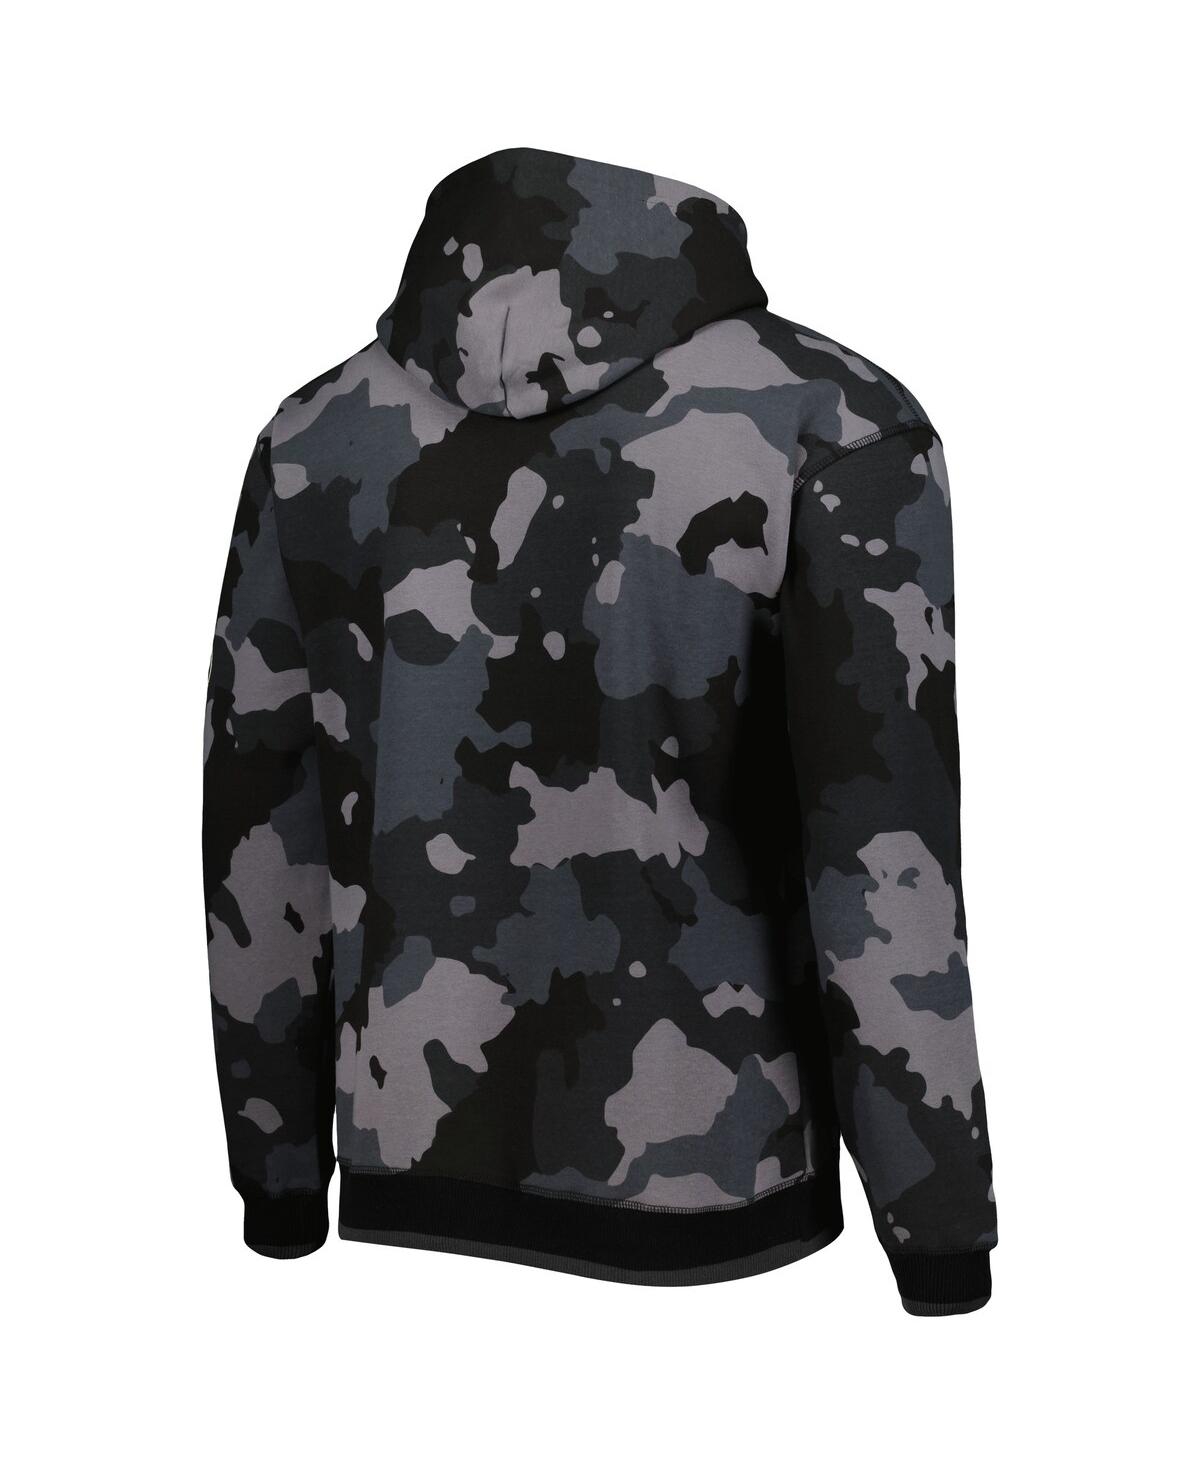 Shop The Wild Collective Men's  Black Pittsburgh Steelers Camo Pullover Hoodie